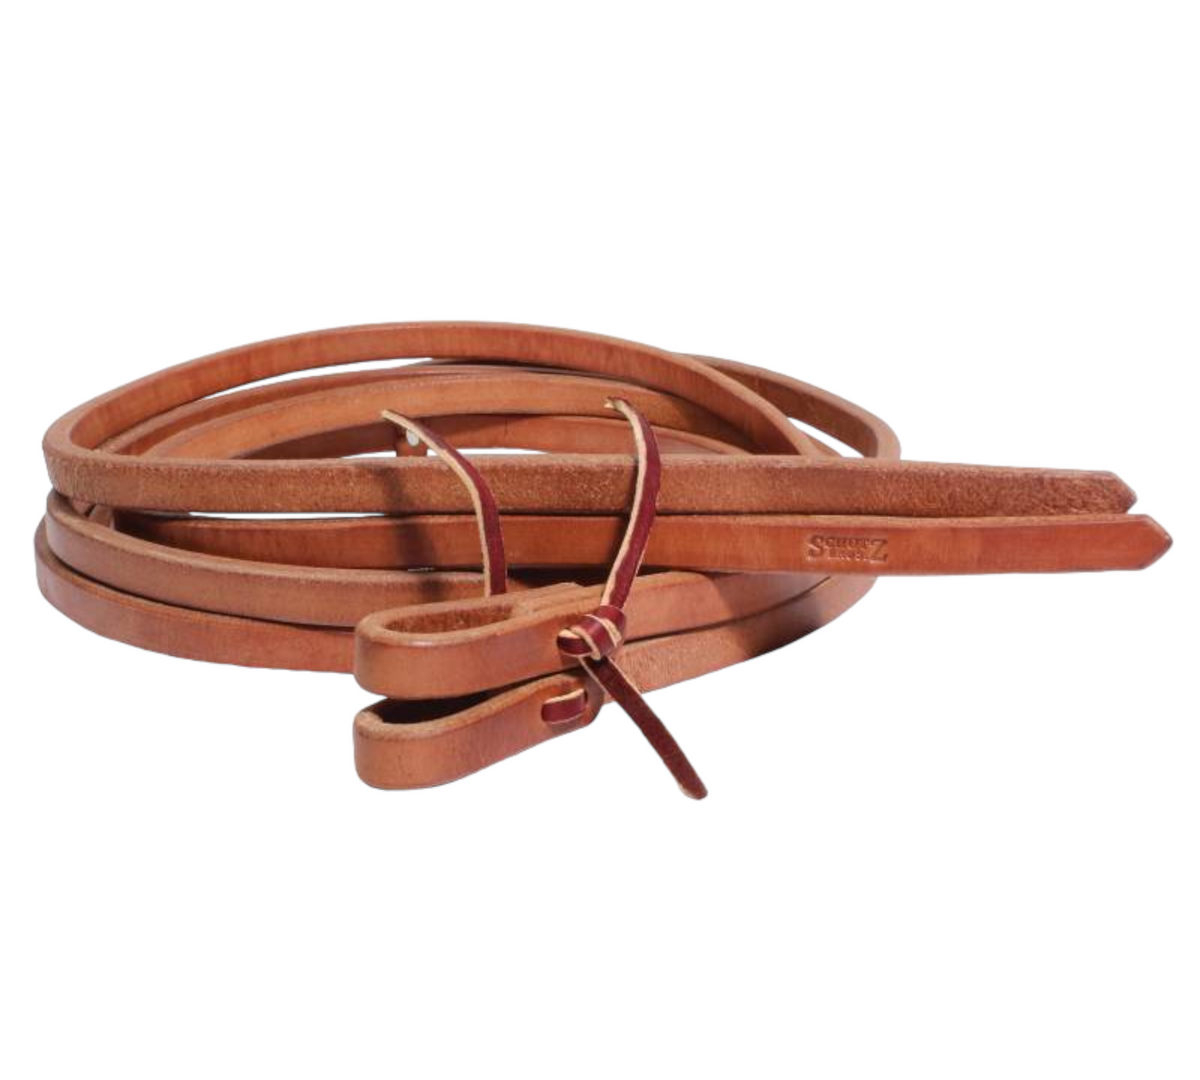 PROFESSIONALS CHOICE 5/8" EXTRA HEAVY 2 pc HARNESS REINS